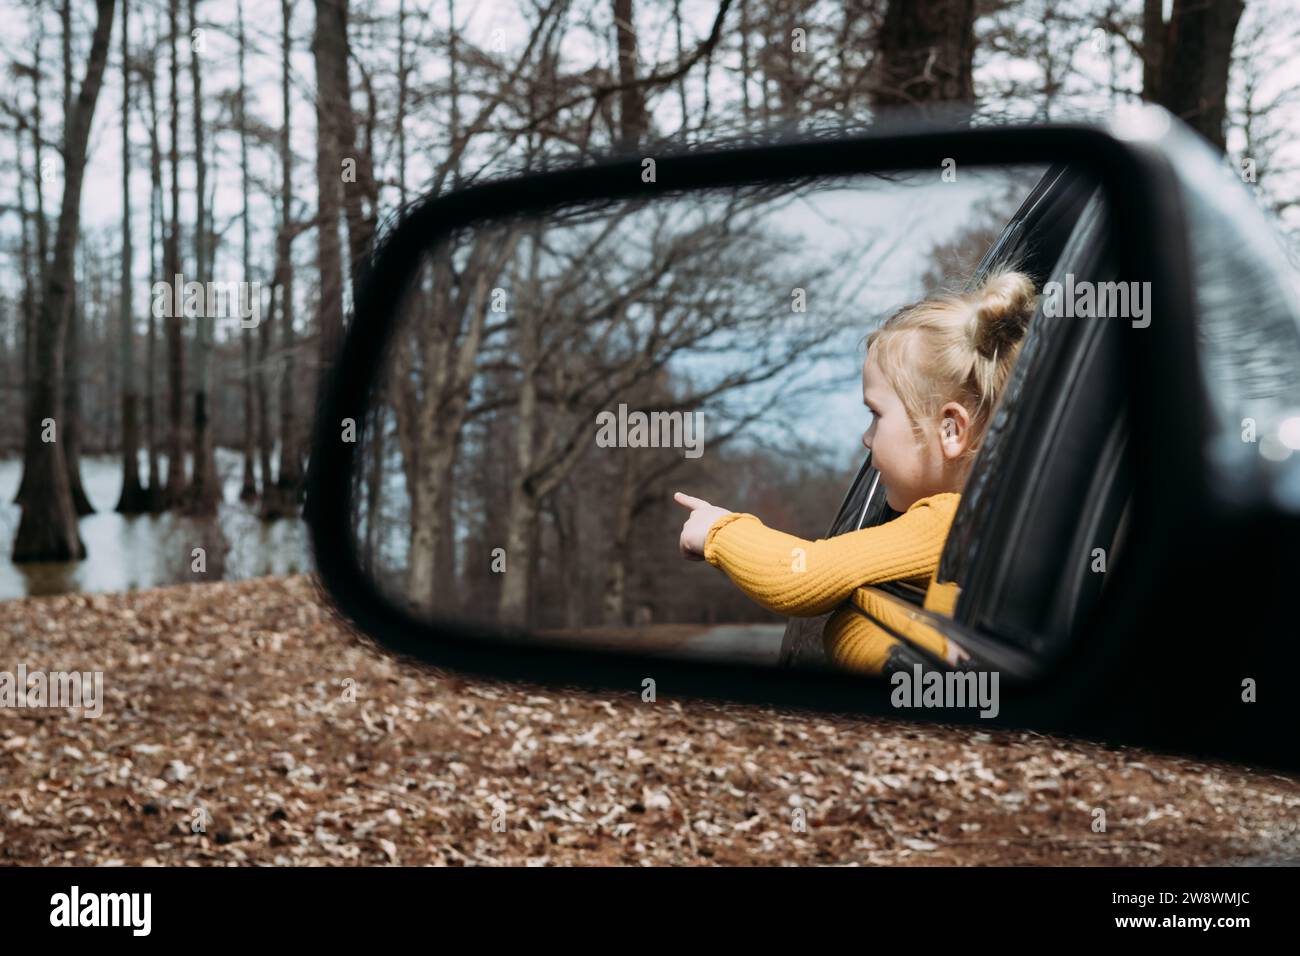 Young child looking out car window pointing at scenery Stock Photo